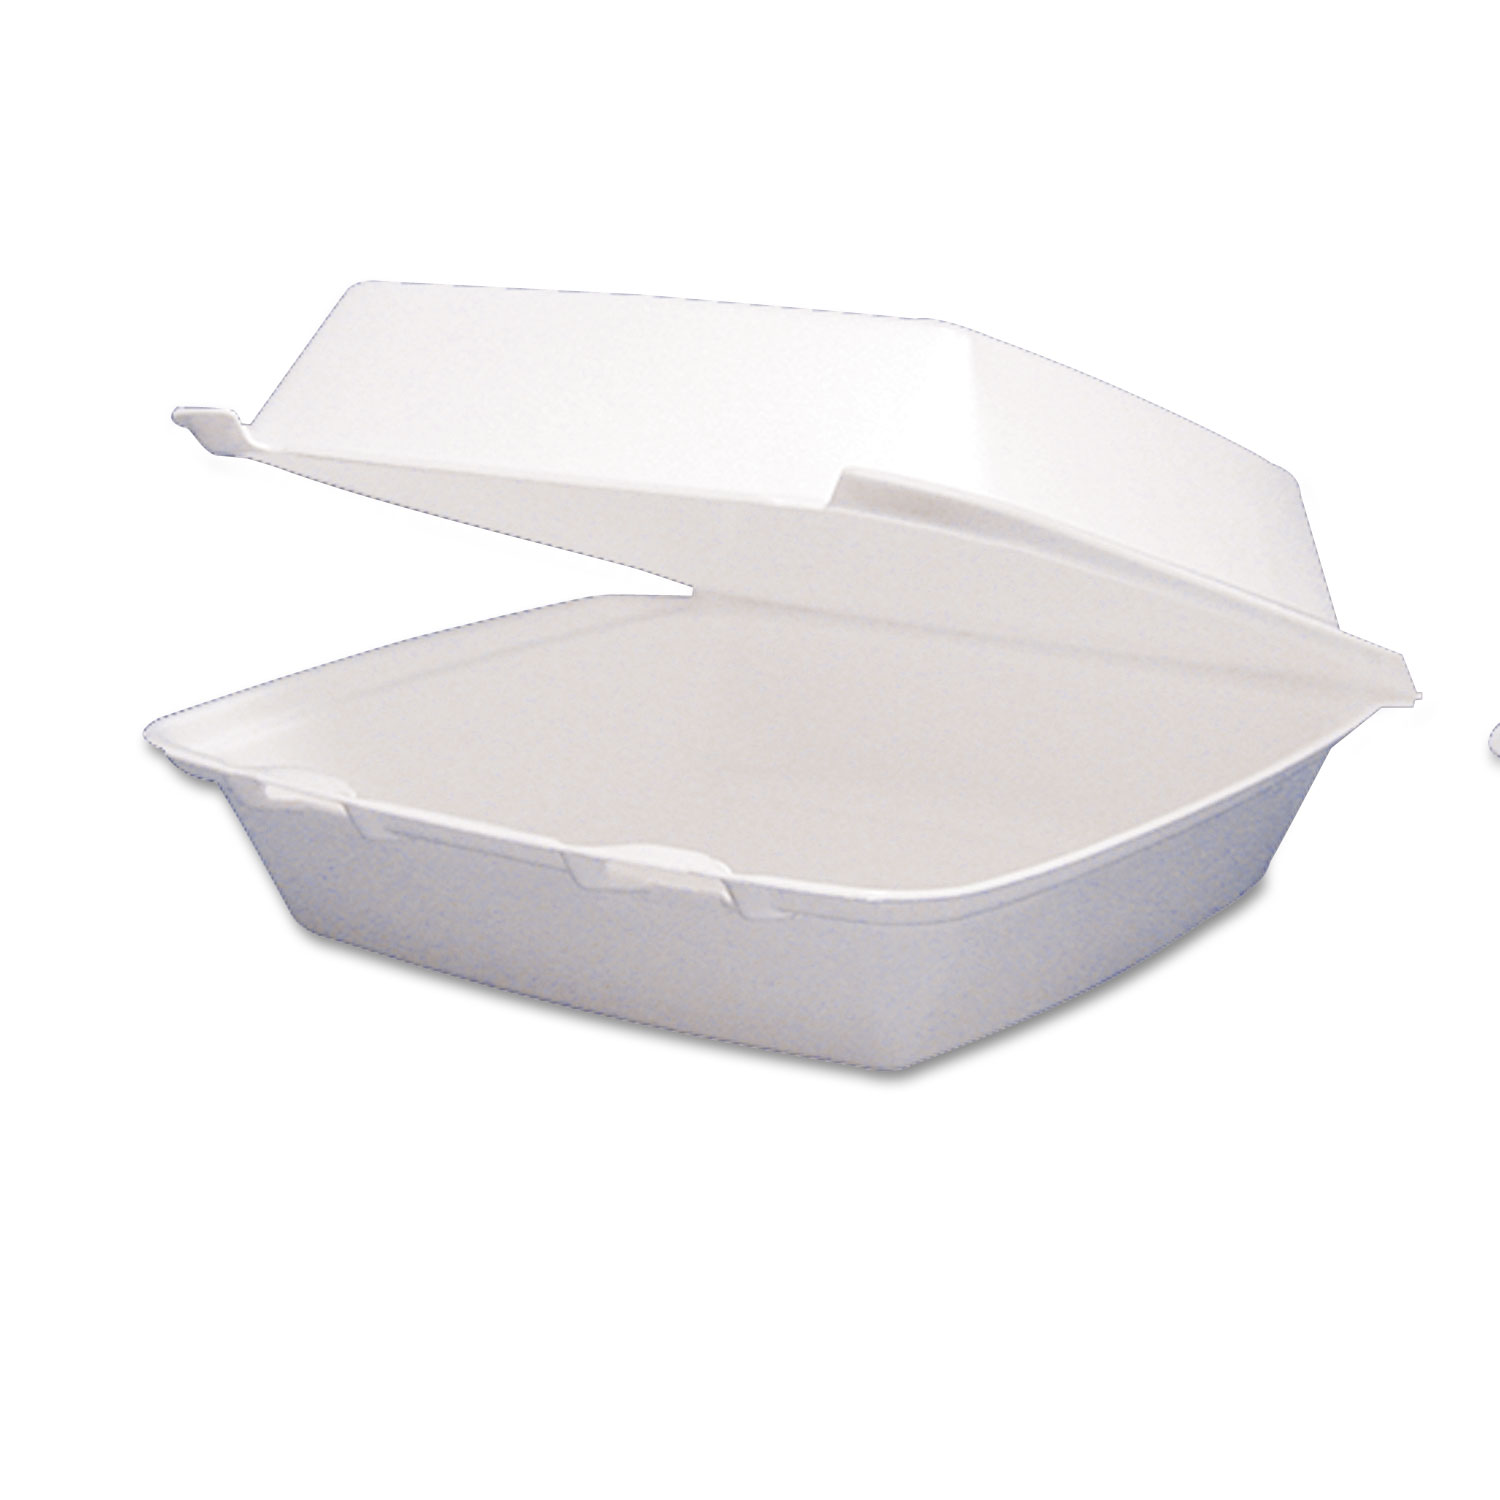 9.25 x 6.4 x 3 Hinged Foam Take Out Containers